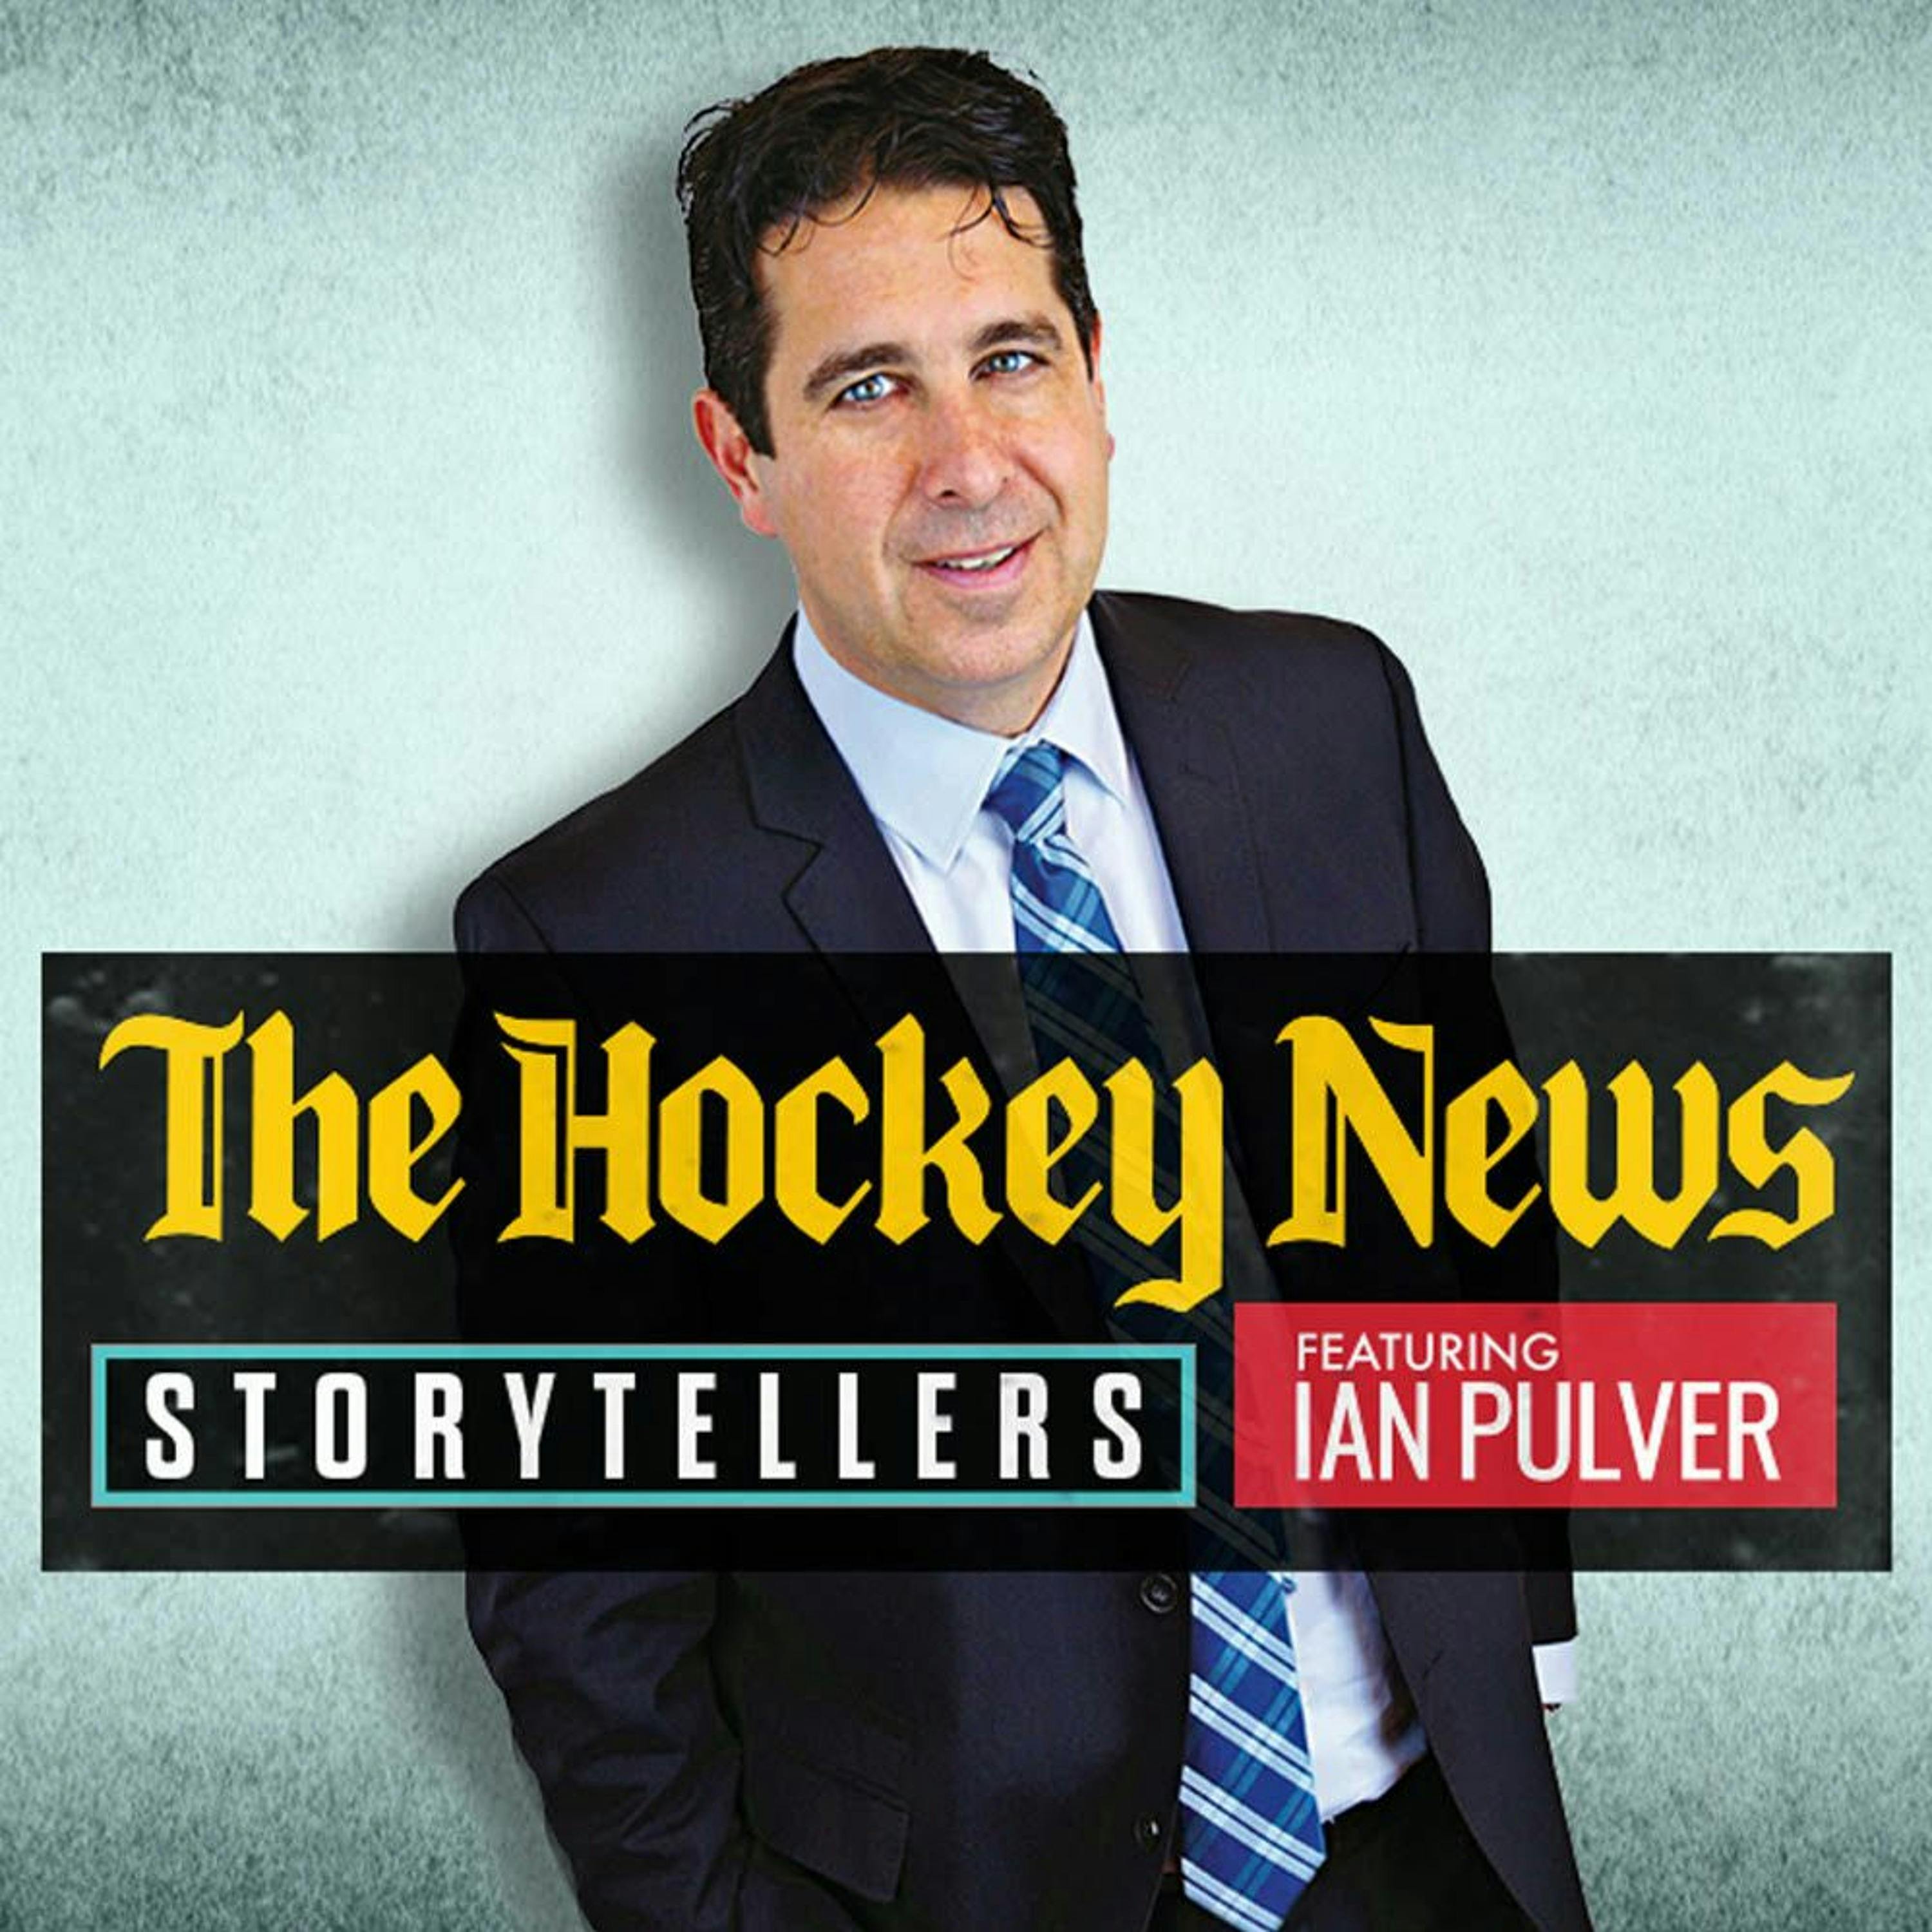 Storytellers Featuring Ian Pulver: Glenn Healy Always Has Your Back